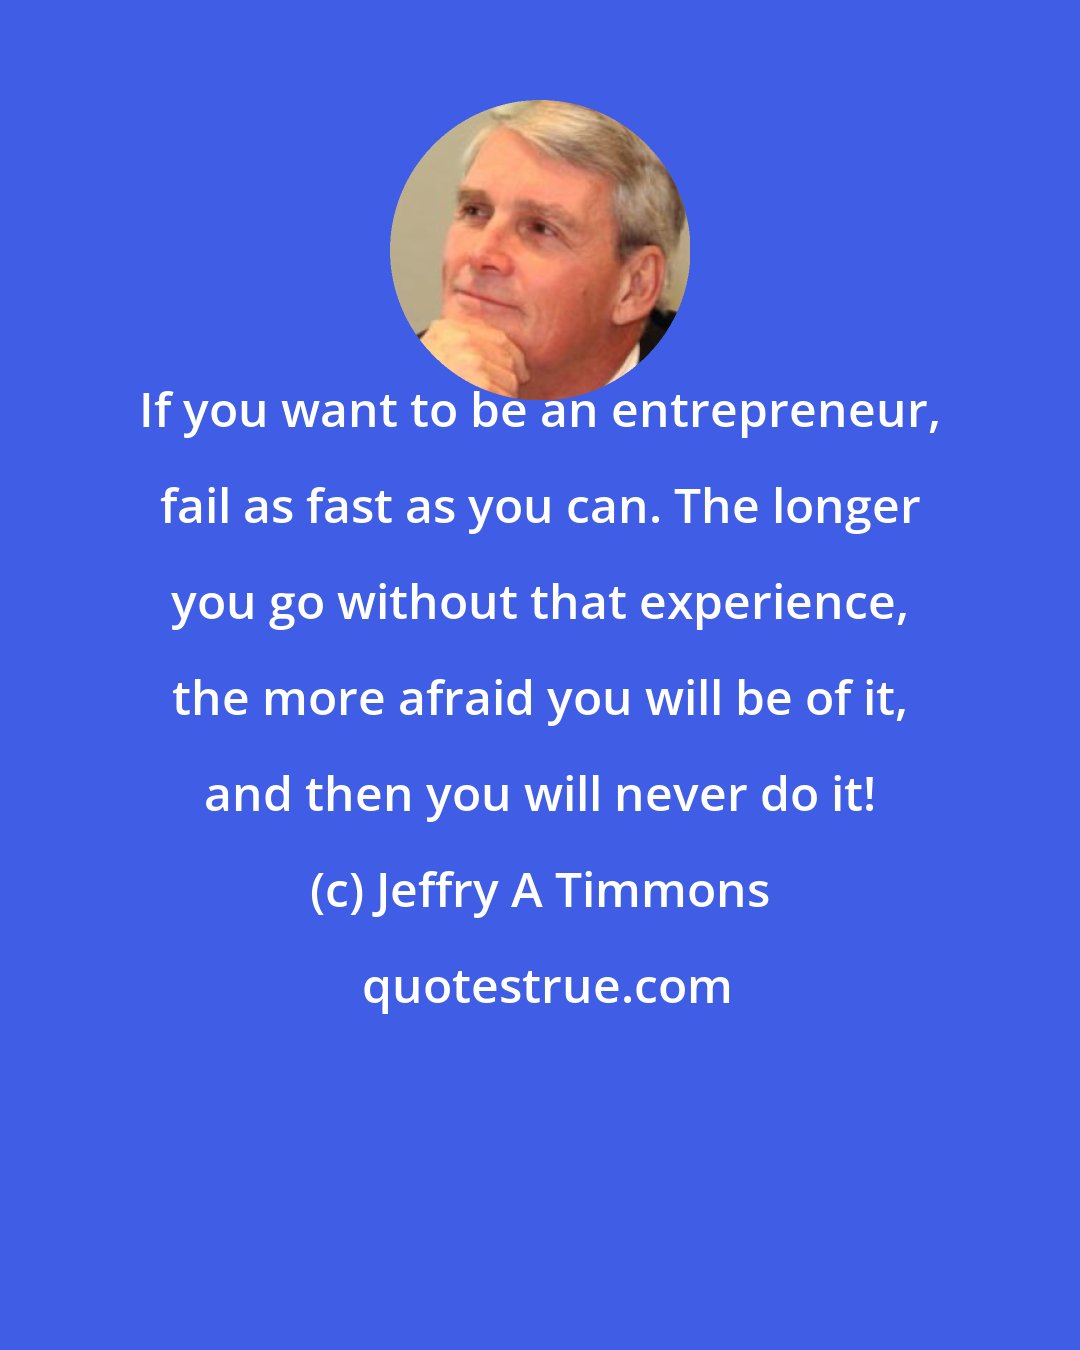 Jeffry A Timmons: If you want to be an entrepreneur, fail as fast as you can. The longer you go without that experience, the more afraid you will be of it, and then you will never do it!